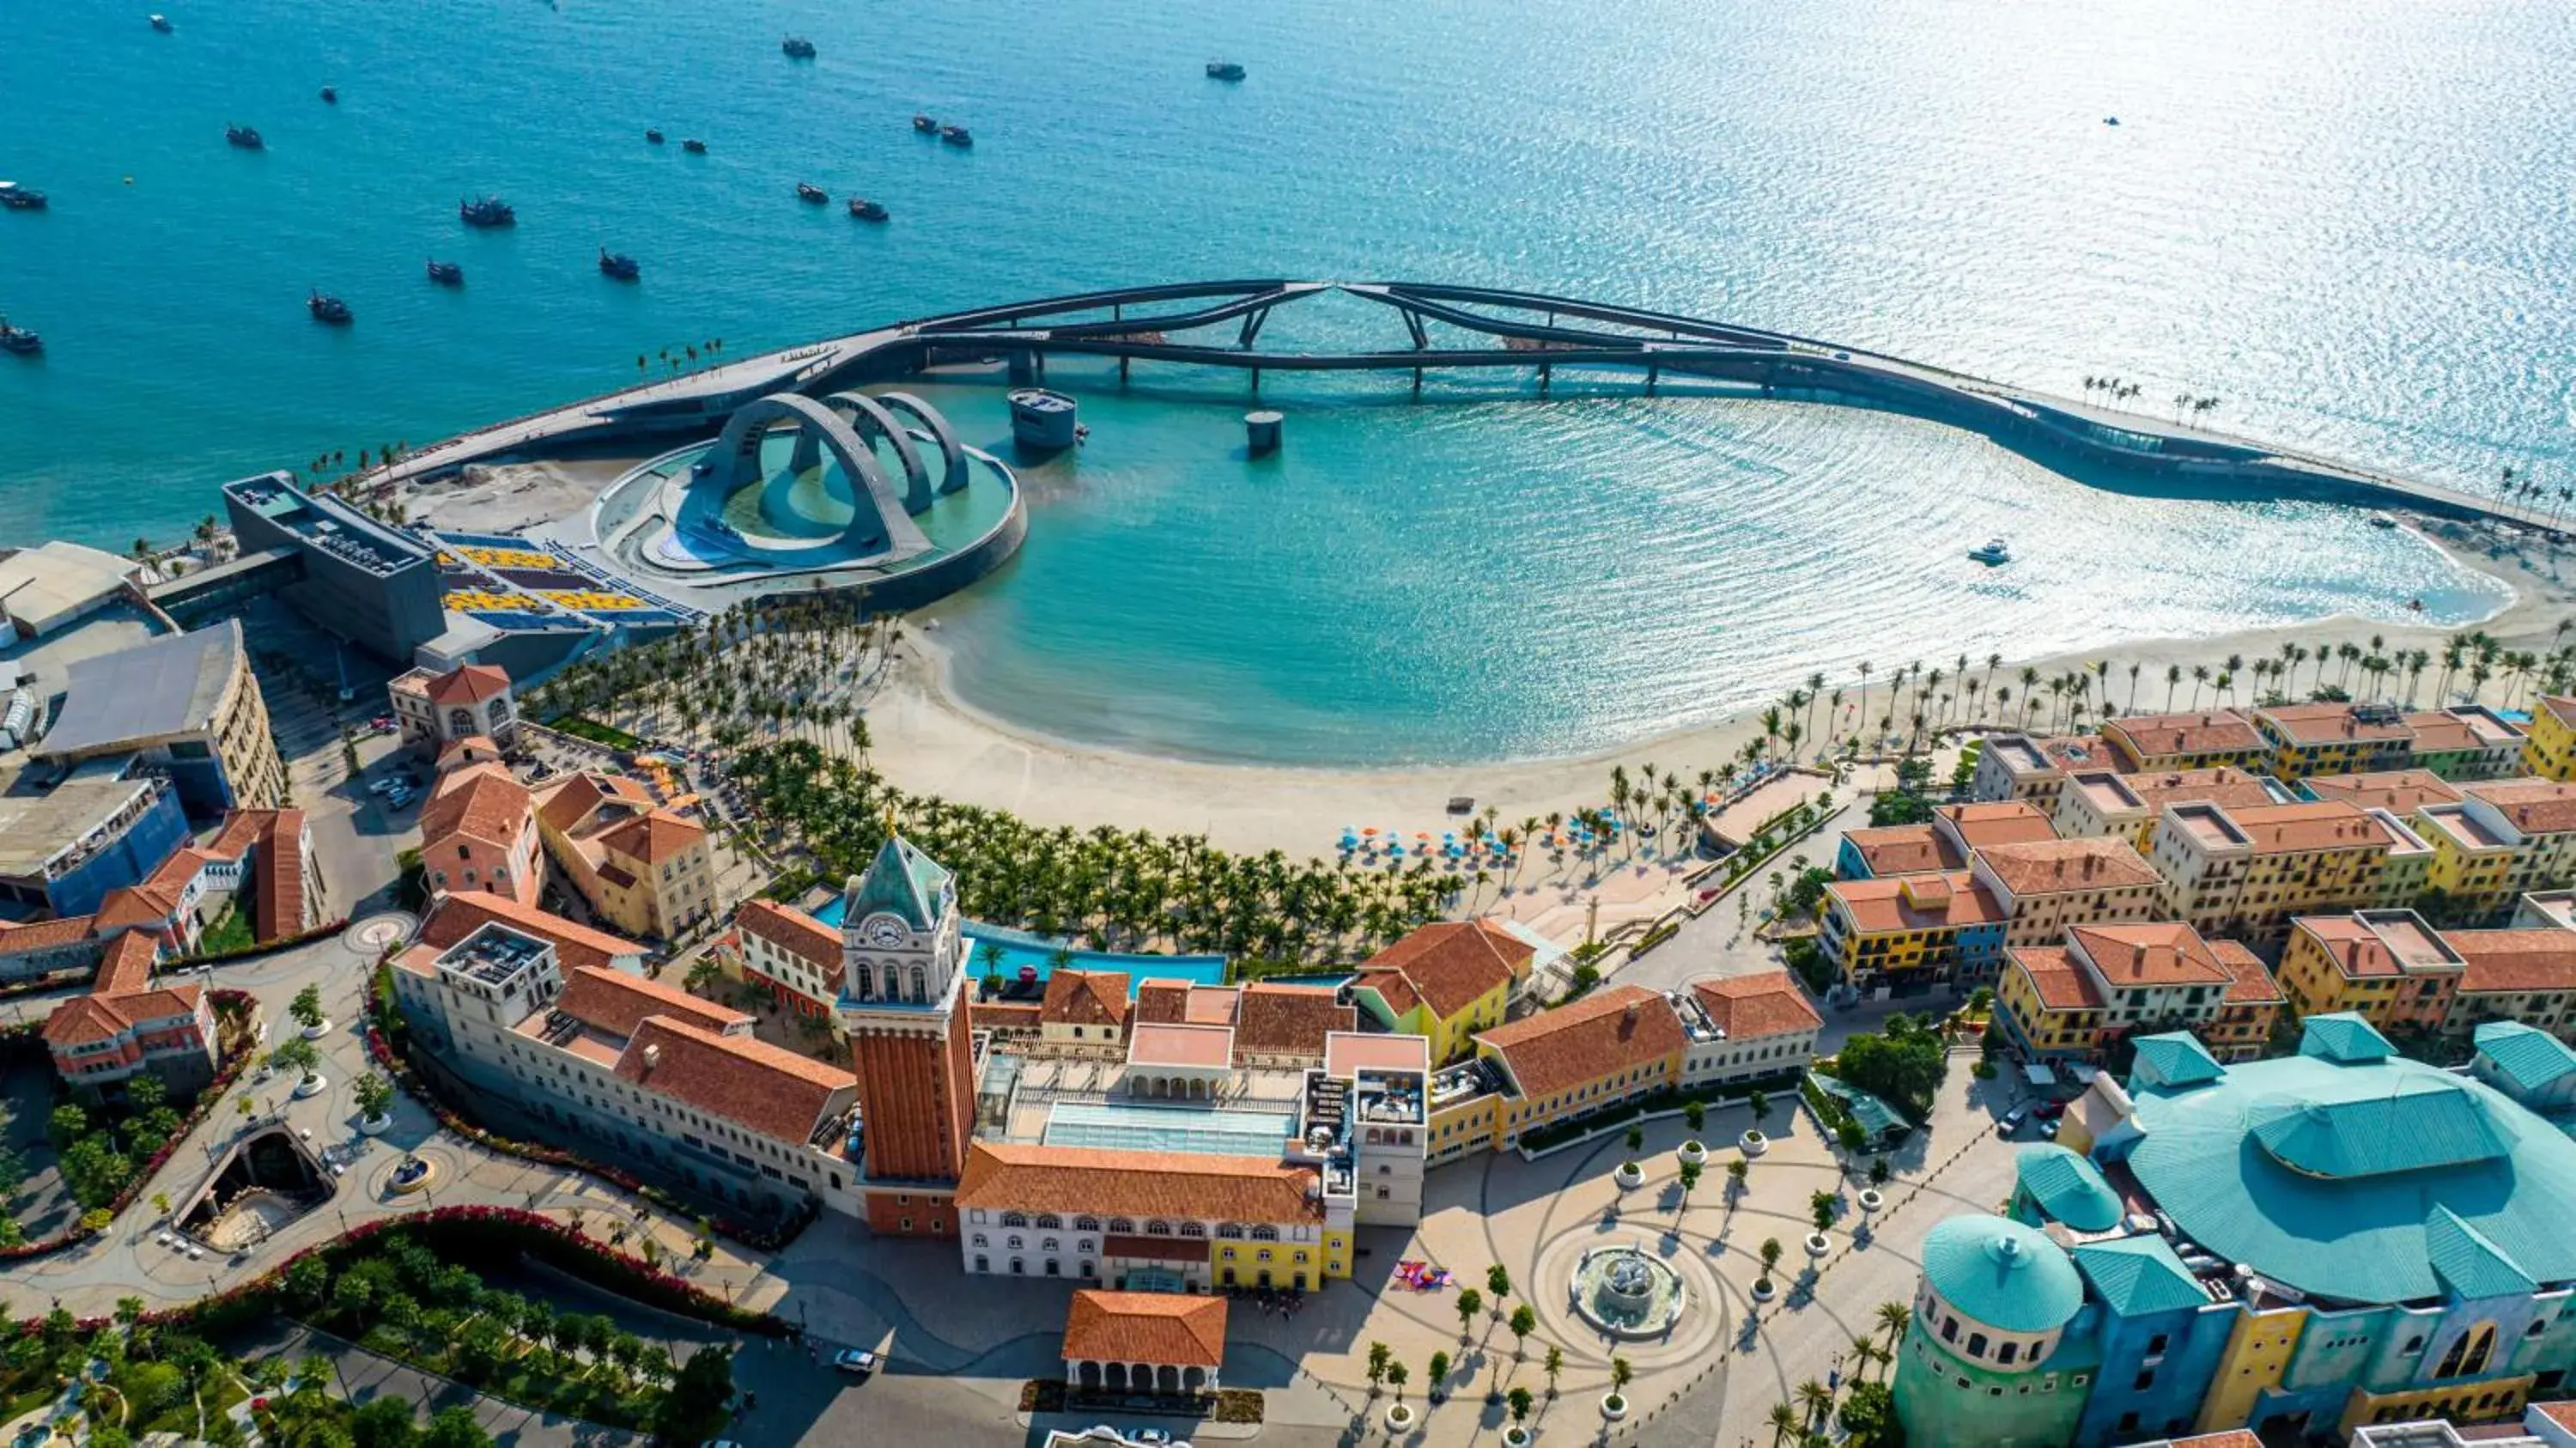 Nearby landmark, Bird's-eye View in Premier Residences Phu Quoc Emerald Bay Managed by Accor